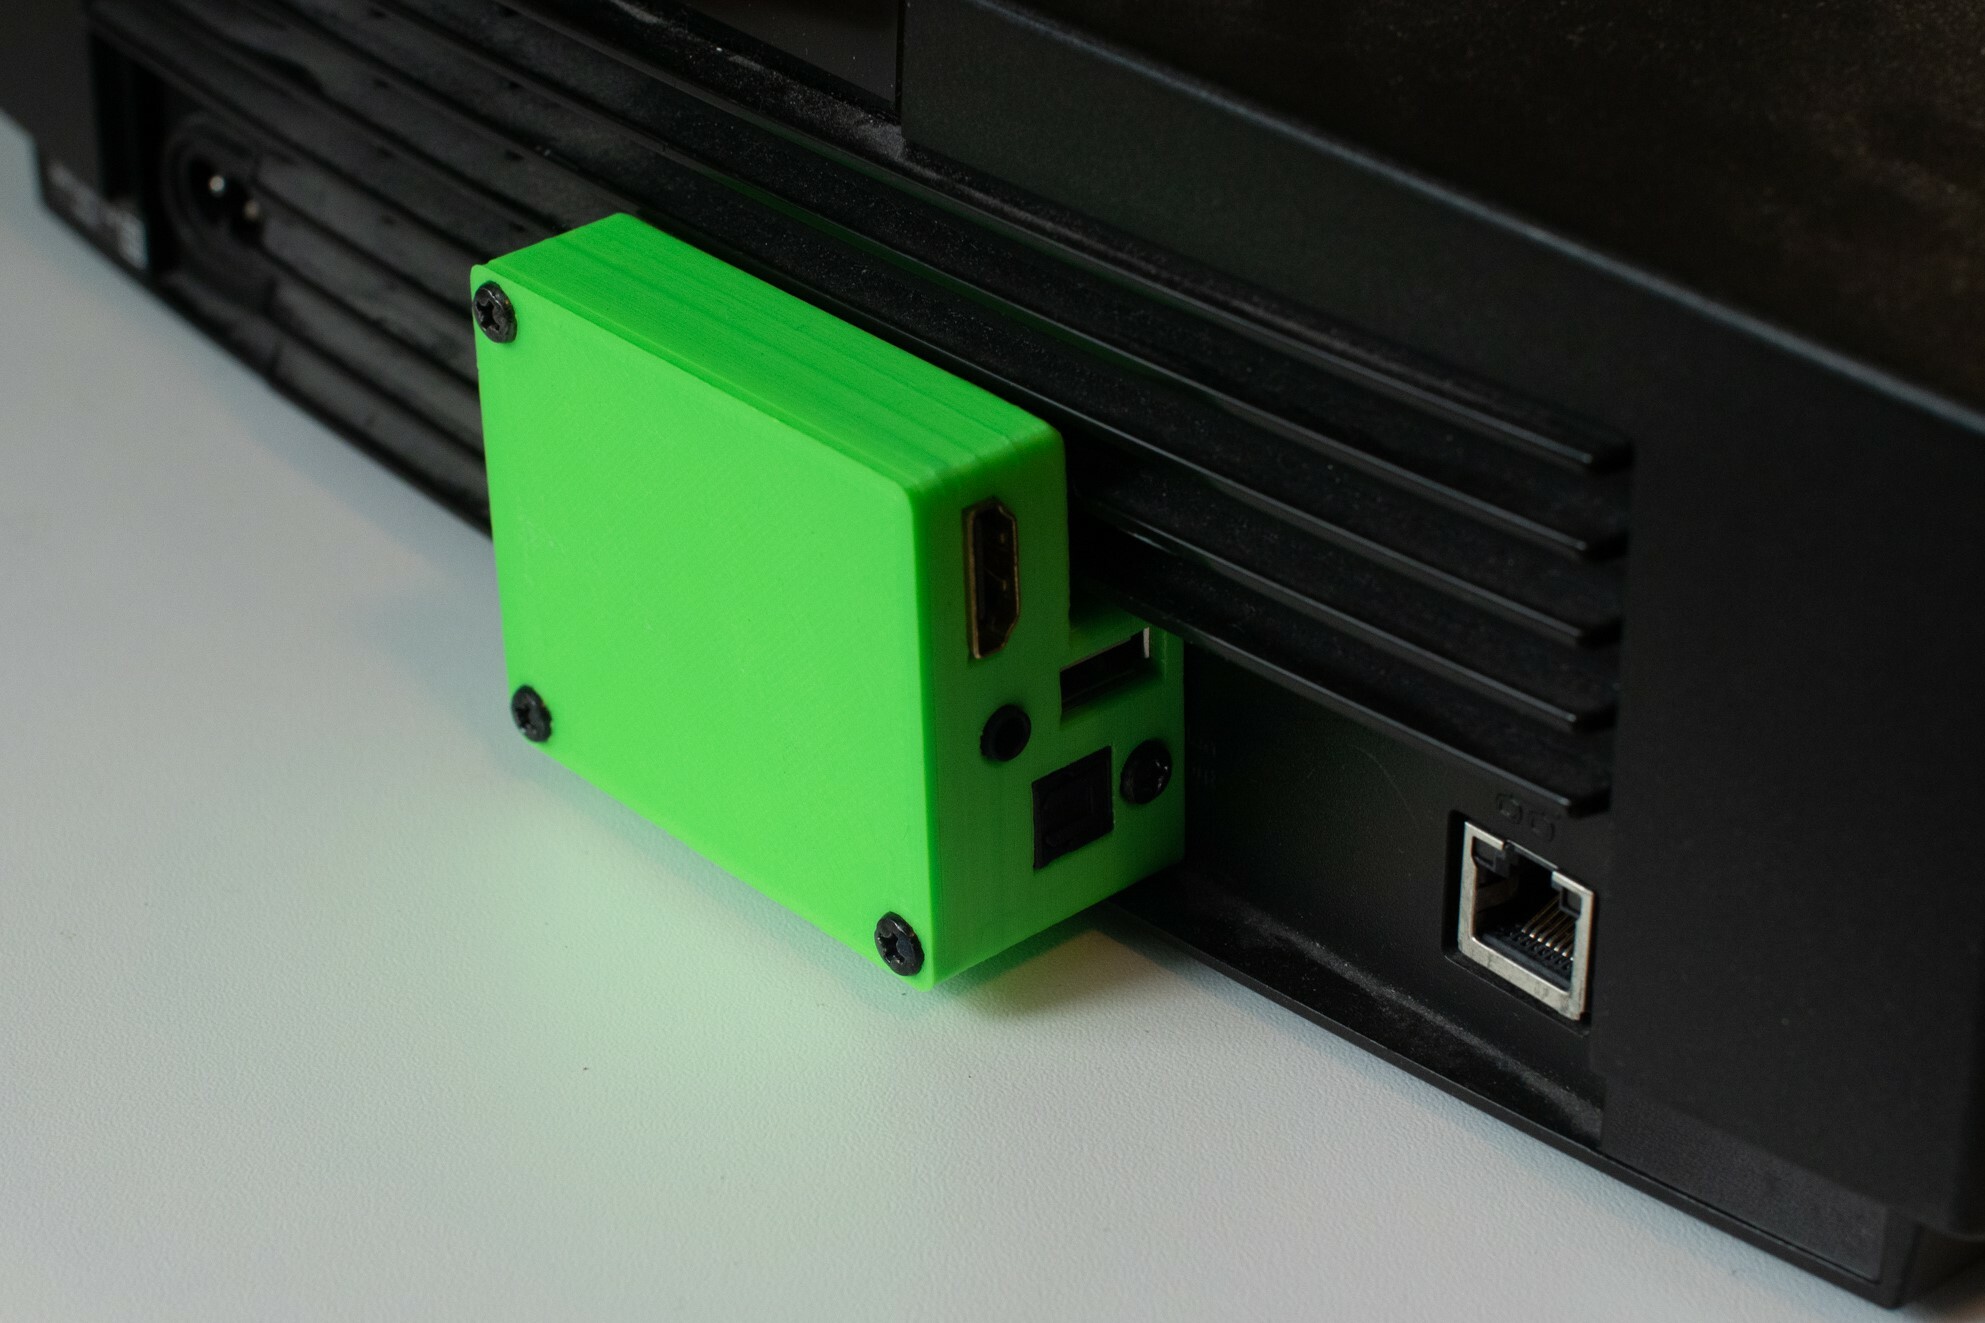 Fig 11: Digital AV adapter inserted into the back of the Xbox